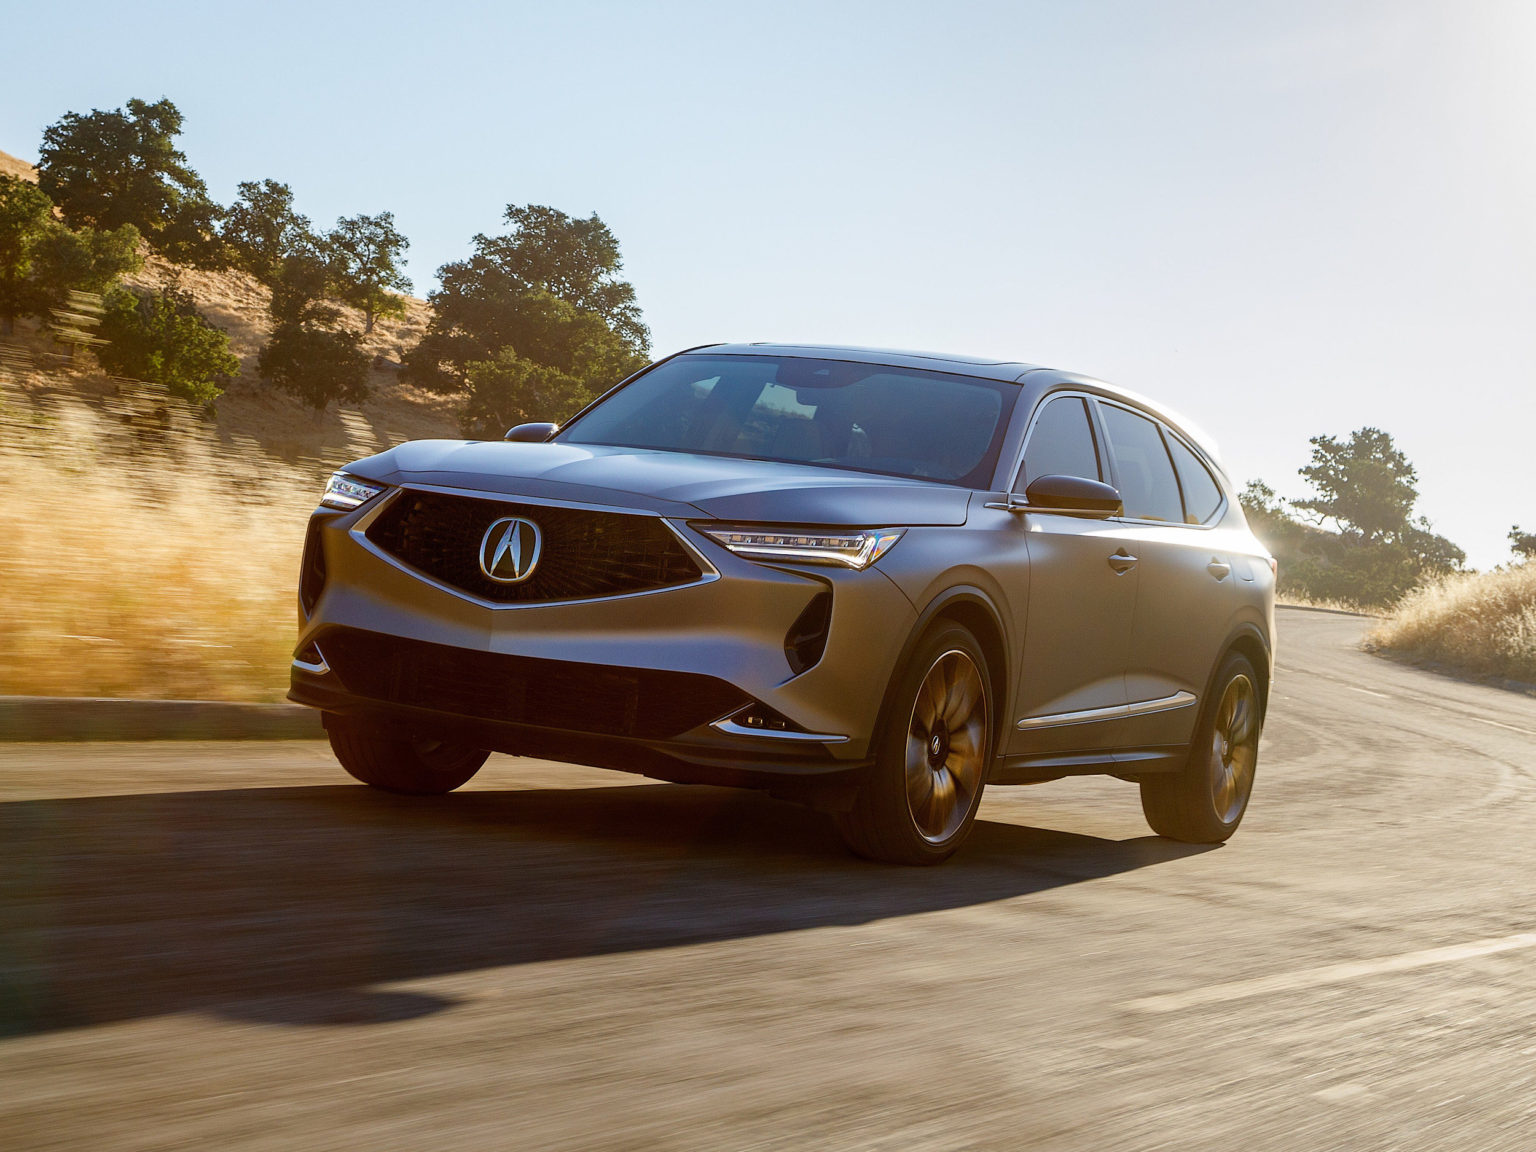 The Acura MDX Prototype has debuted, showing off the future of the SUV.